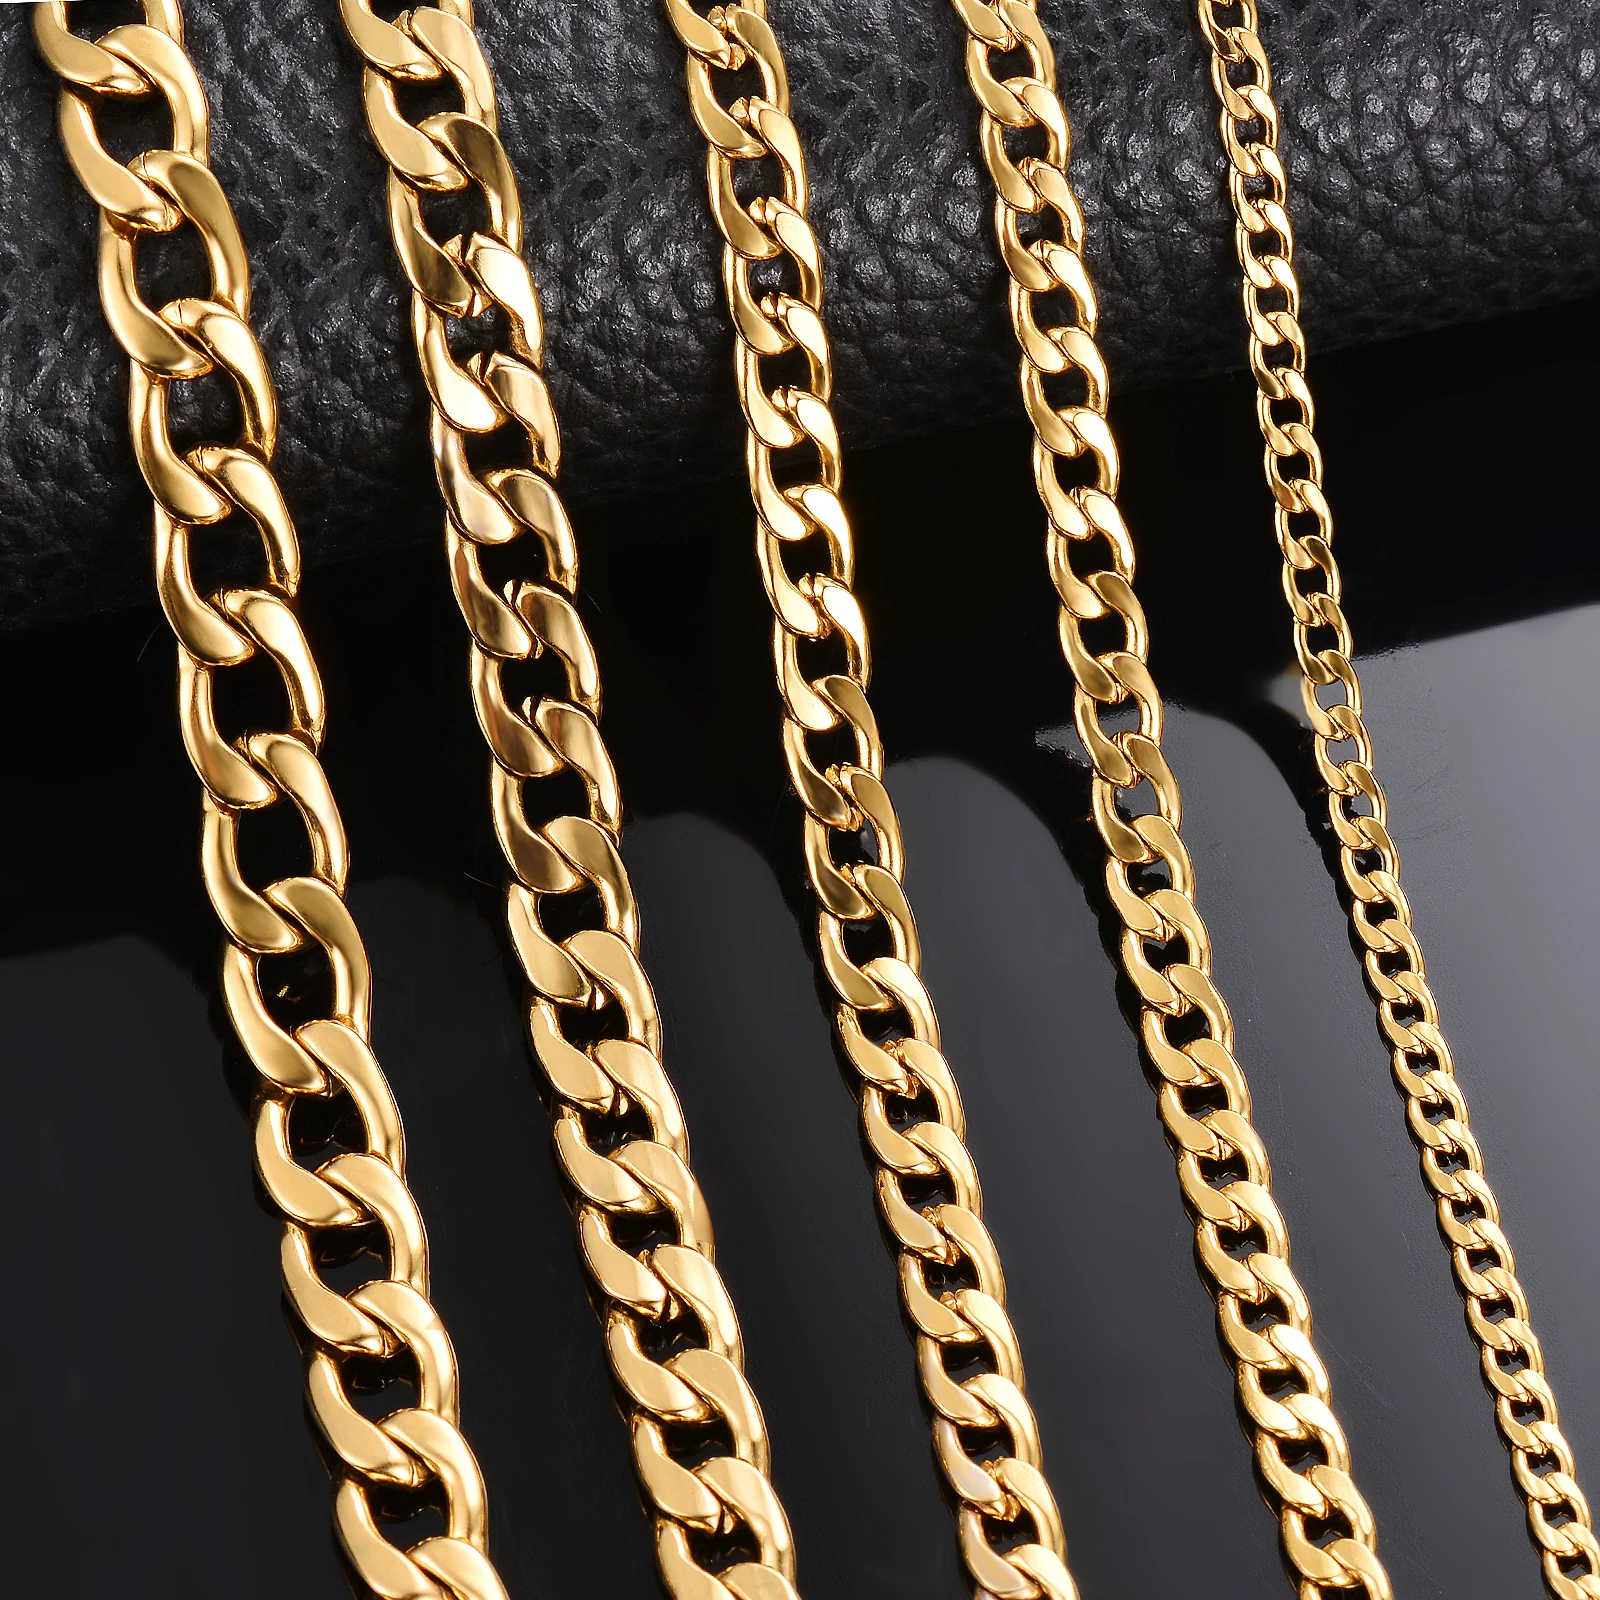 UNIQUE T&T 6mm Gold Two-Tone 316L Stainless Steel Curb Chain Necklace C22 